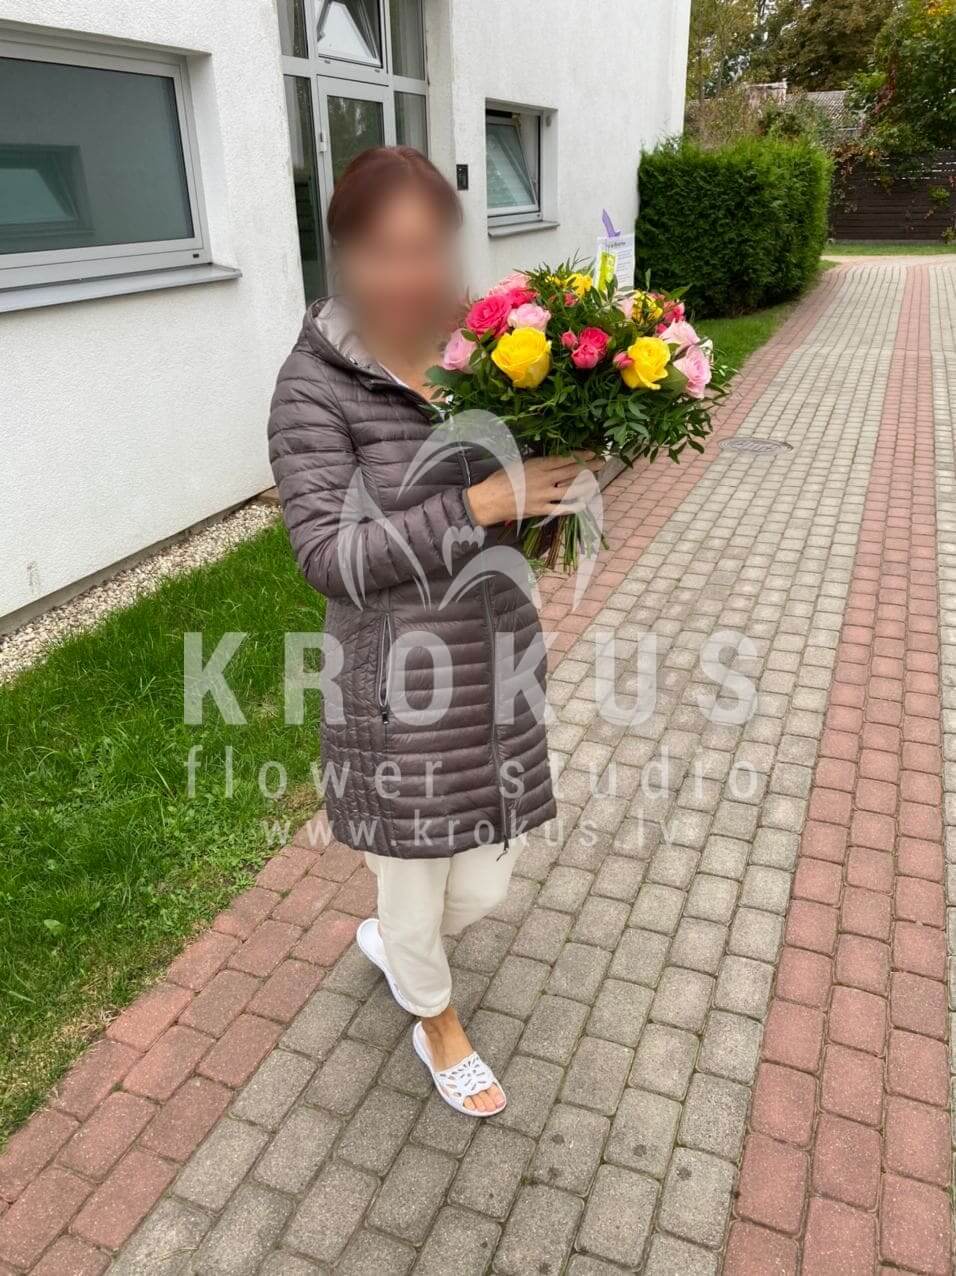 Deliver flowers to Ziemeļu rajons (shrub rosespink rosespistaciayellow roses)